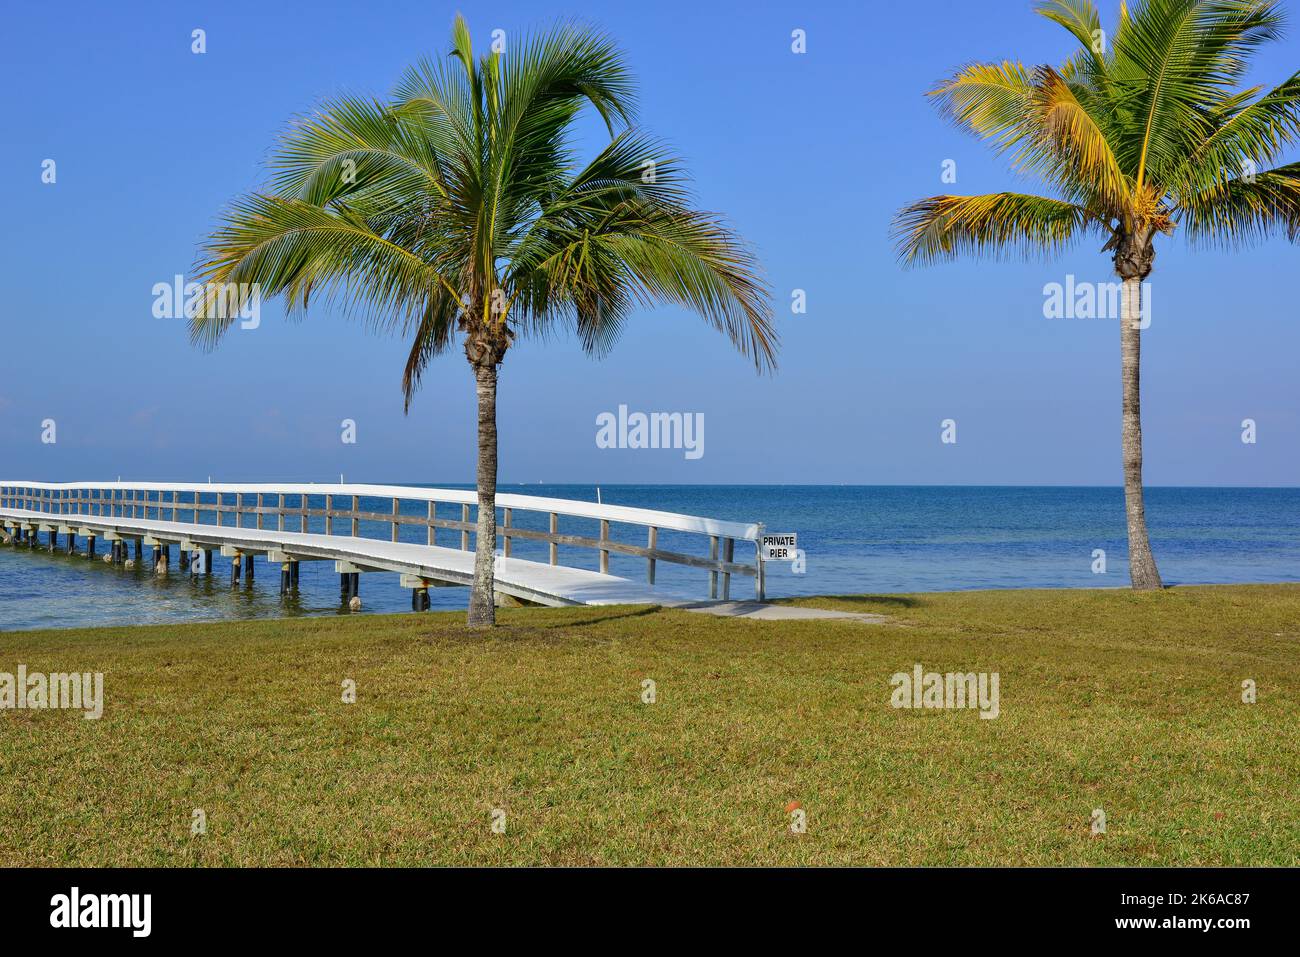 A serene panoramic view over the Charlotte Harbor of a wooden pier and palm trees in  Bokeelia, Florida, on Pine Island, quintessential Old Florida Stock Photo